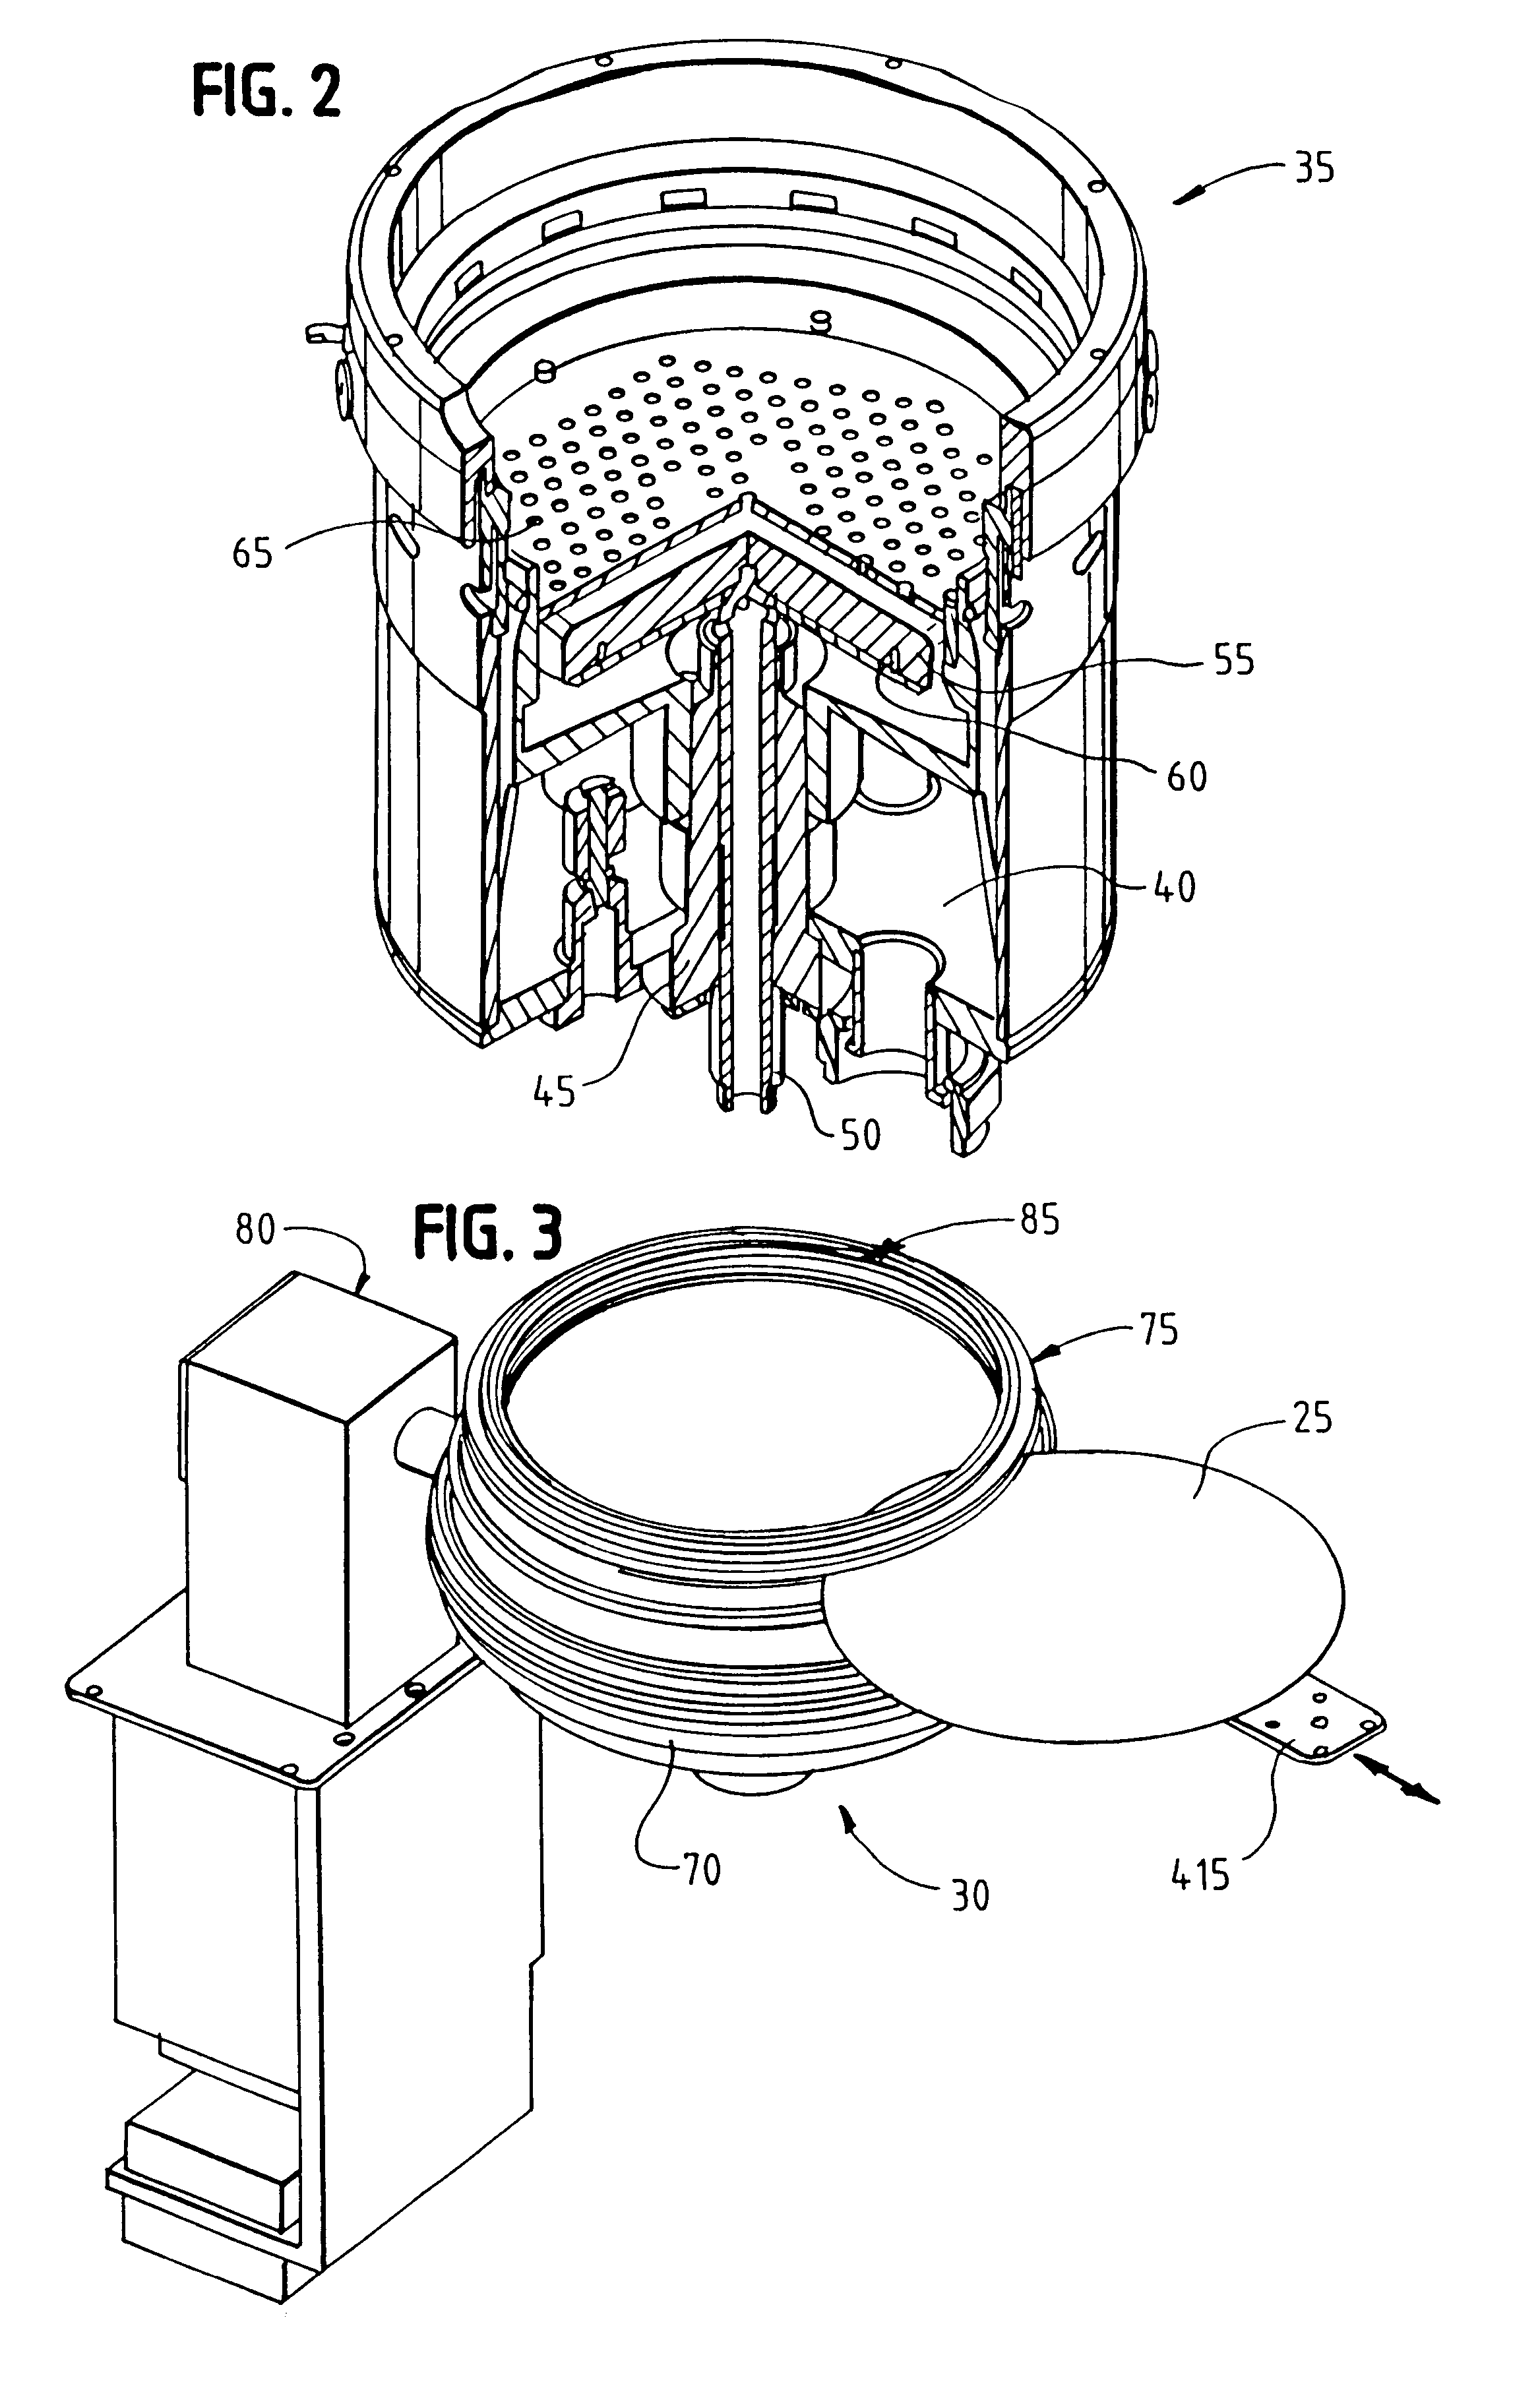 Aparatus for processing the surface of a microelectronic workpiece